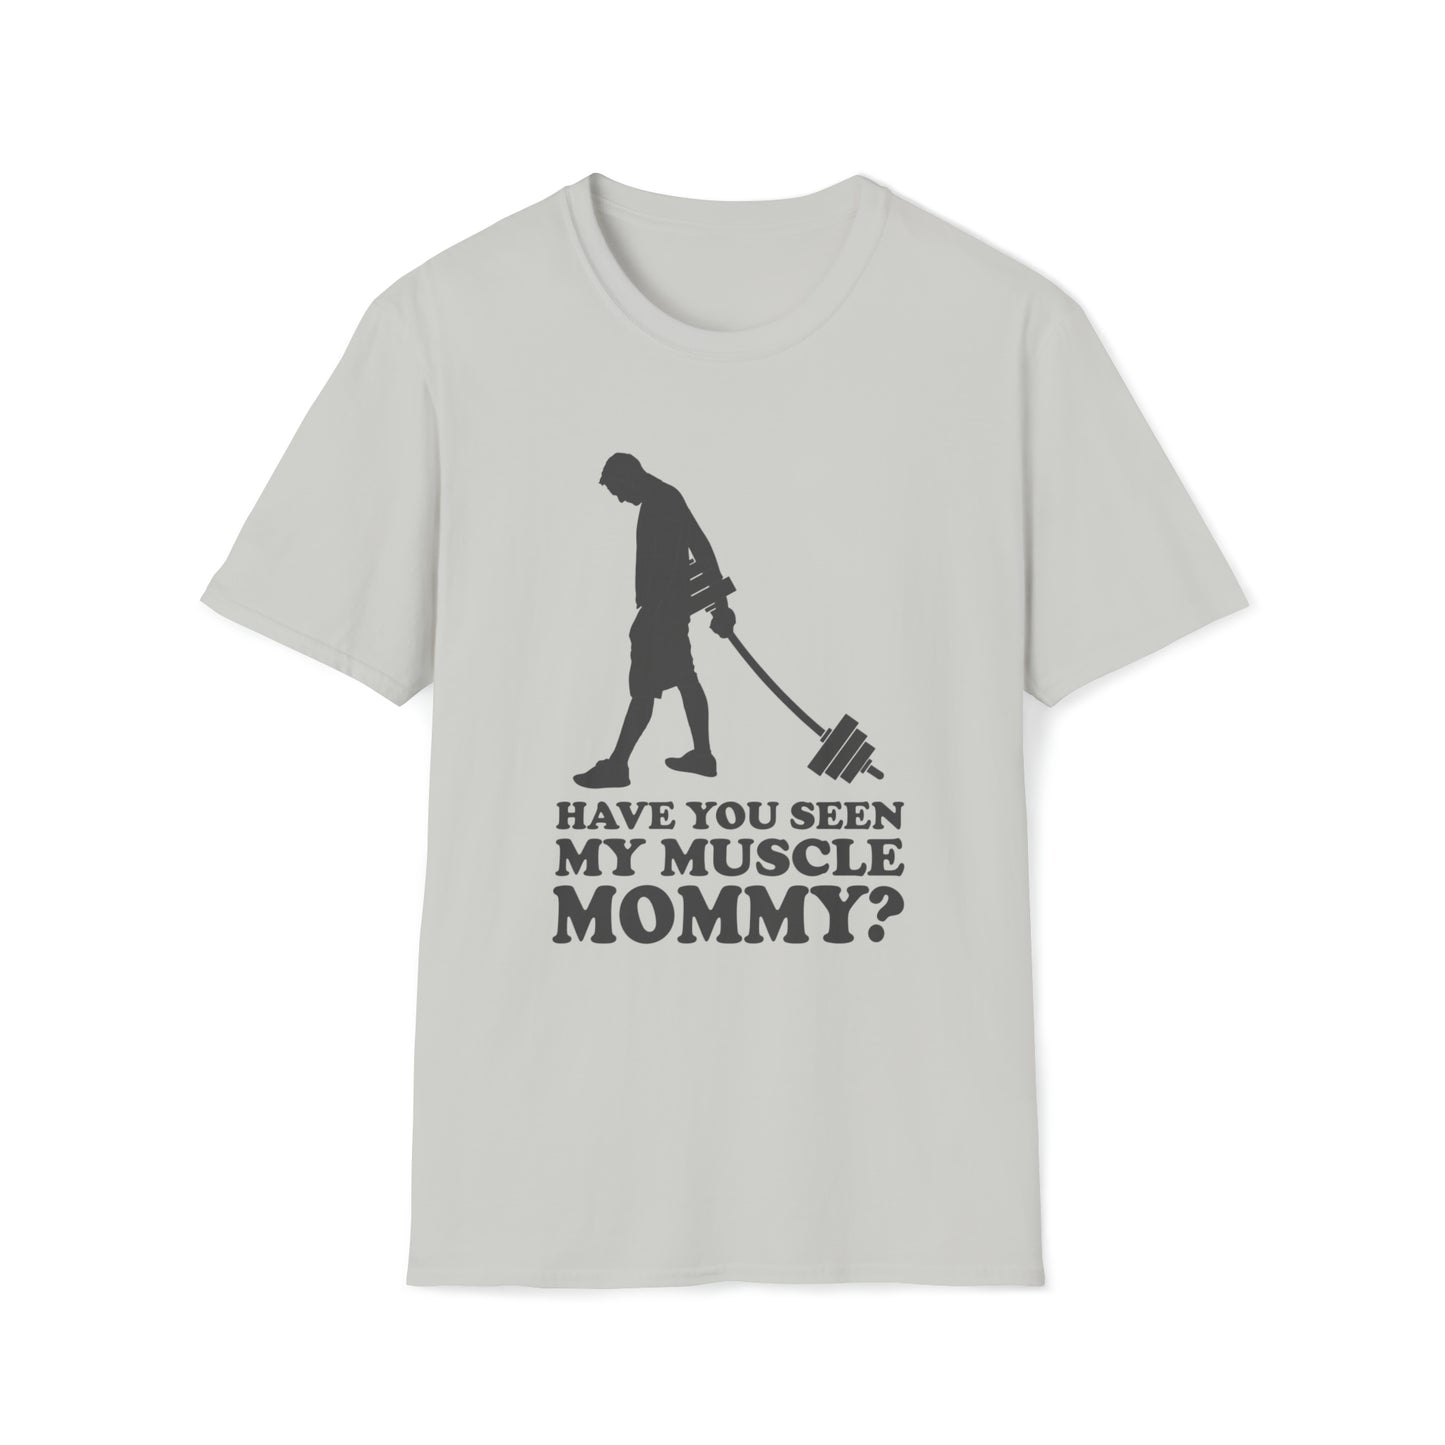 Have You Seen My Muscle Mommy? - Unisex Softstyle T-Shirt